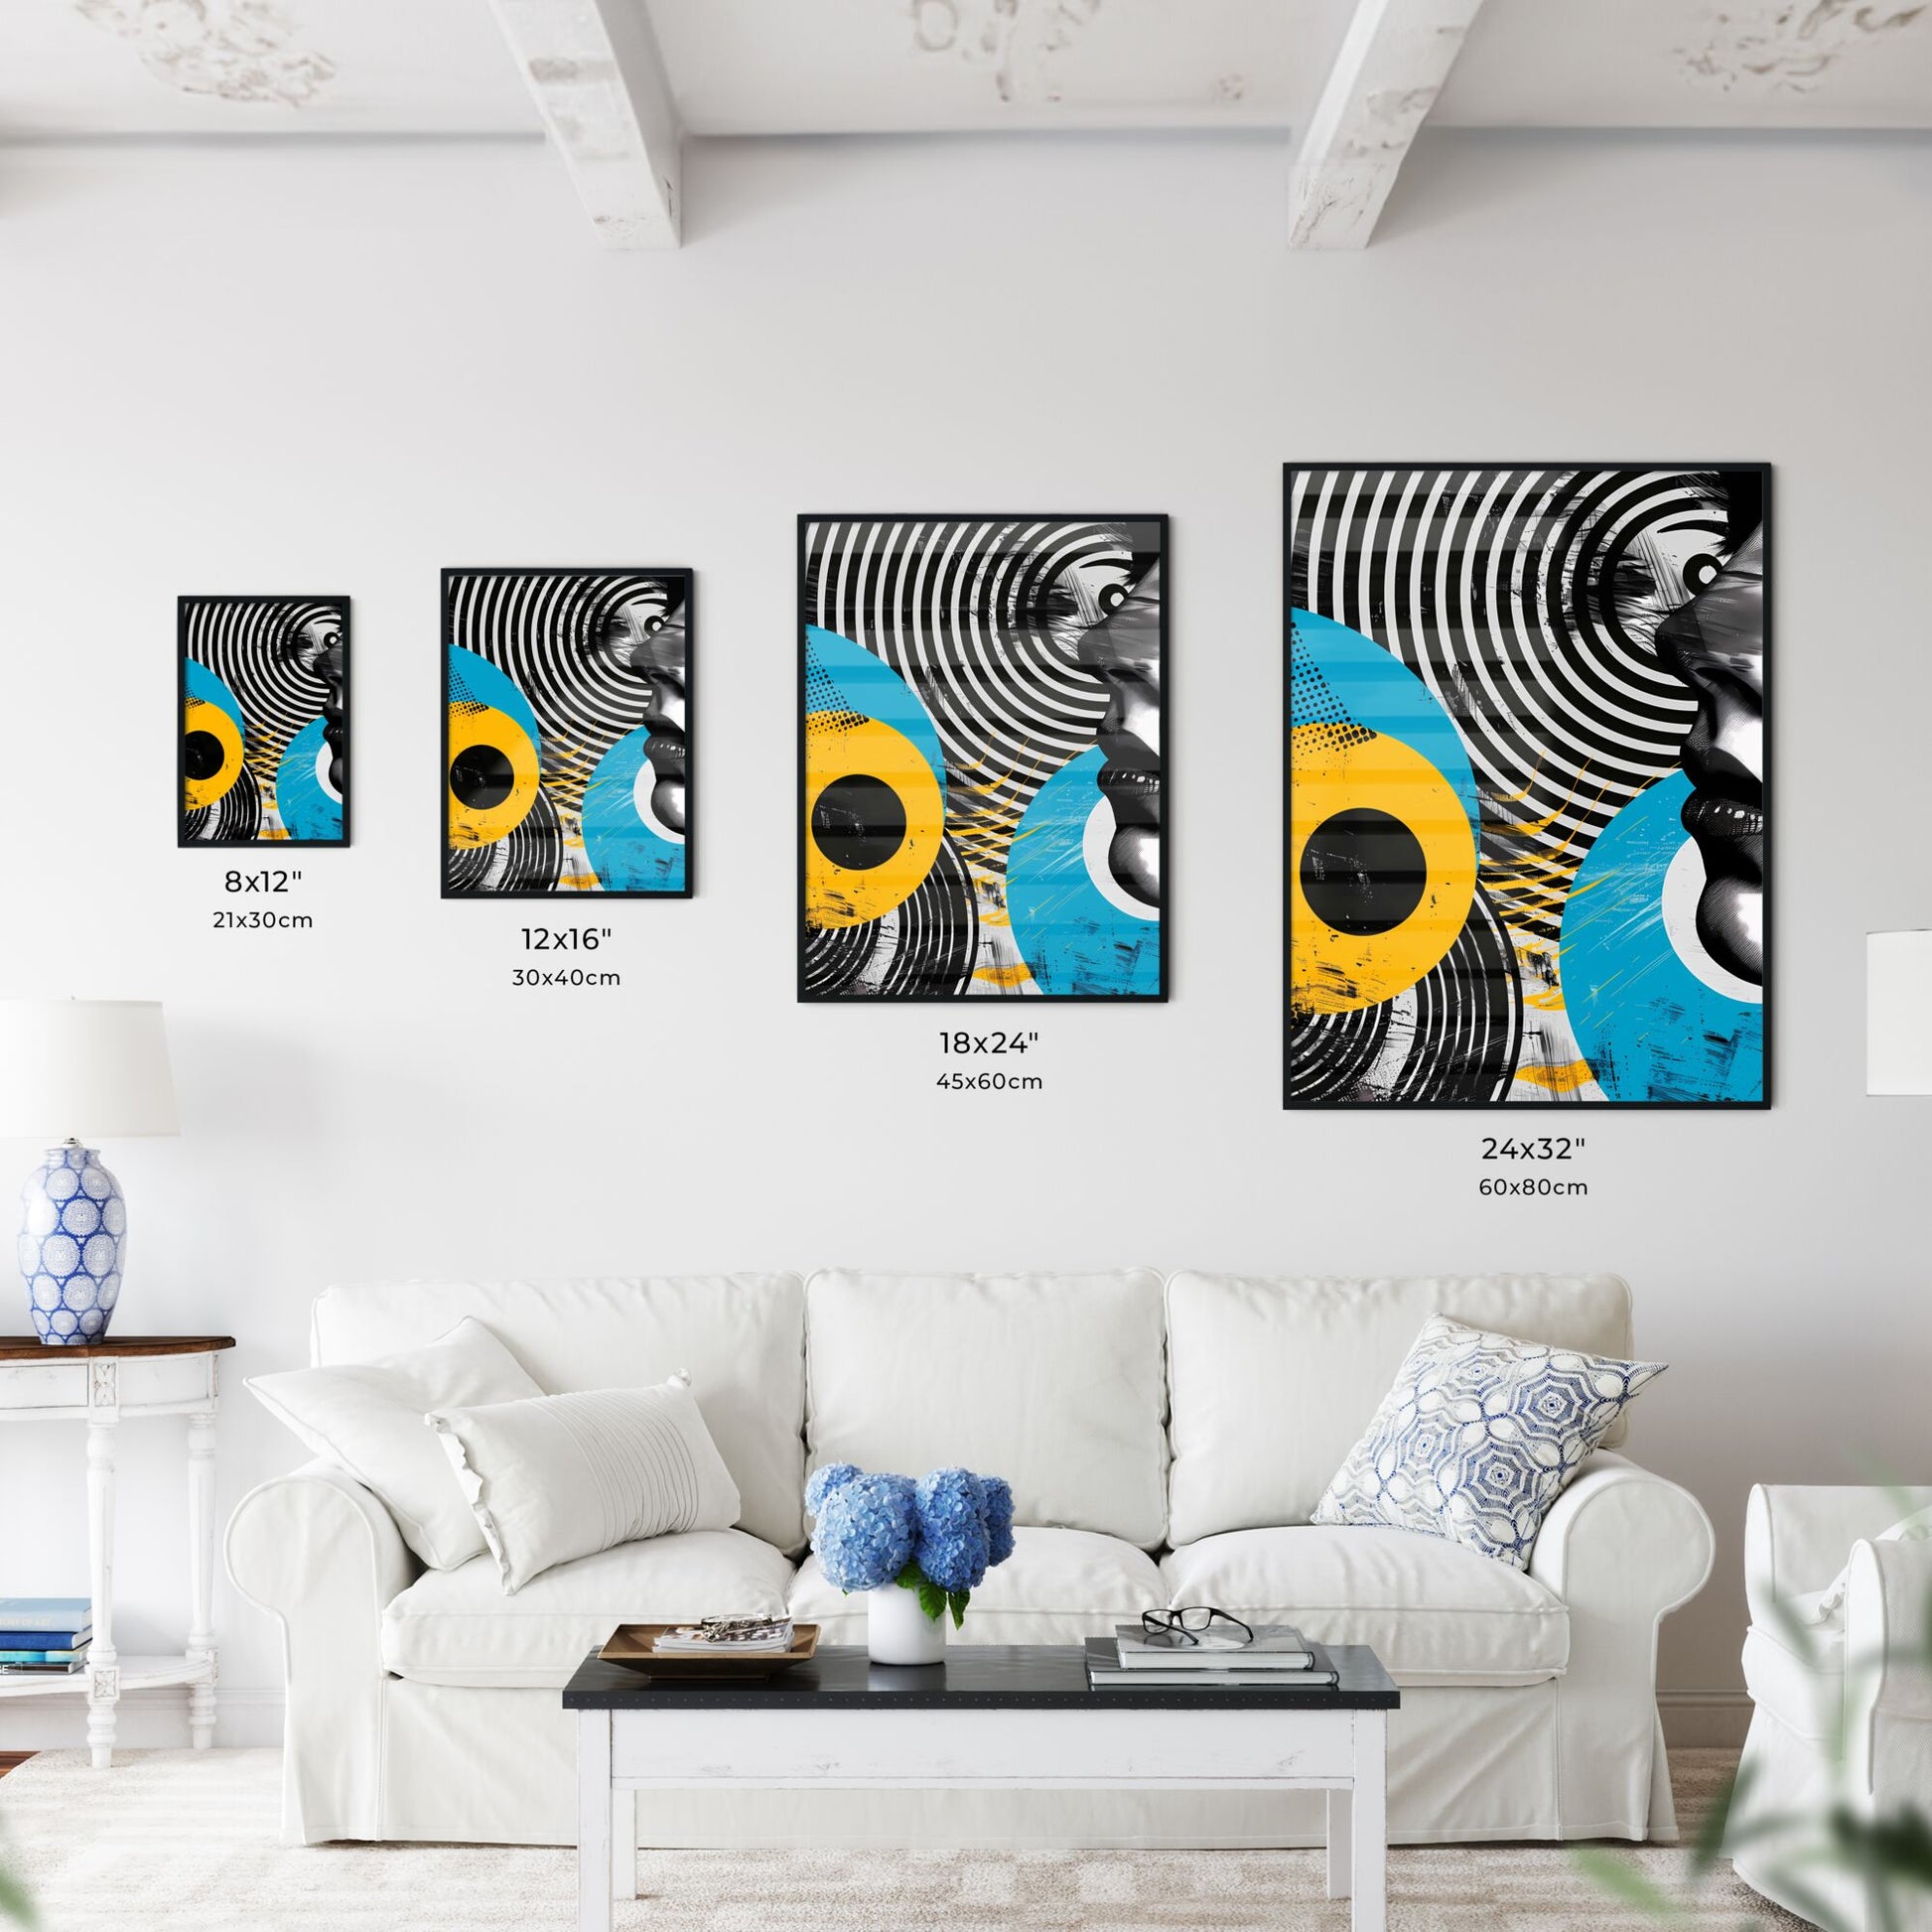 Sophisticated Corporate Graphic Design: Vibrant Geometric Painting with Magenta, Yellow, Cyan, Black, White Swirls and Circles, Emphasizing Unstoppable New Ideas Default Title